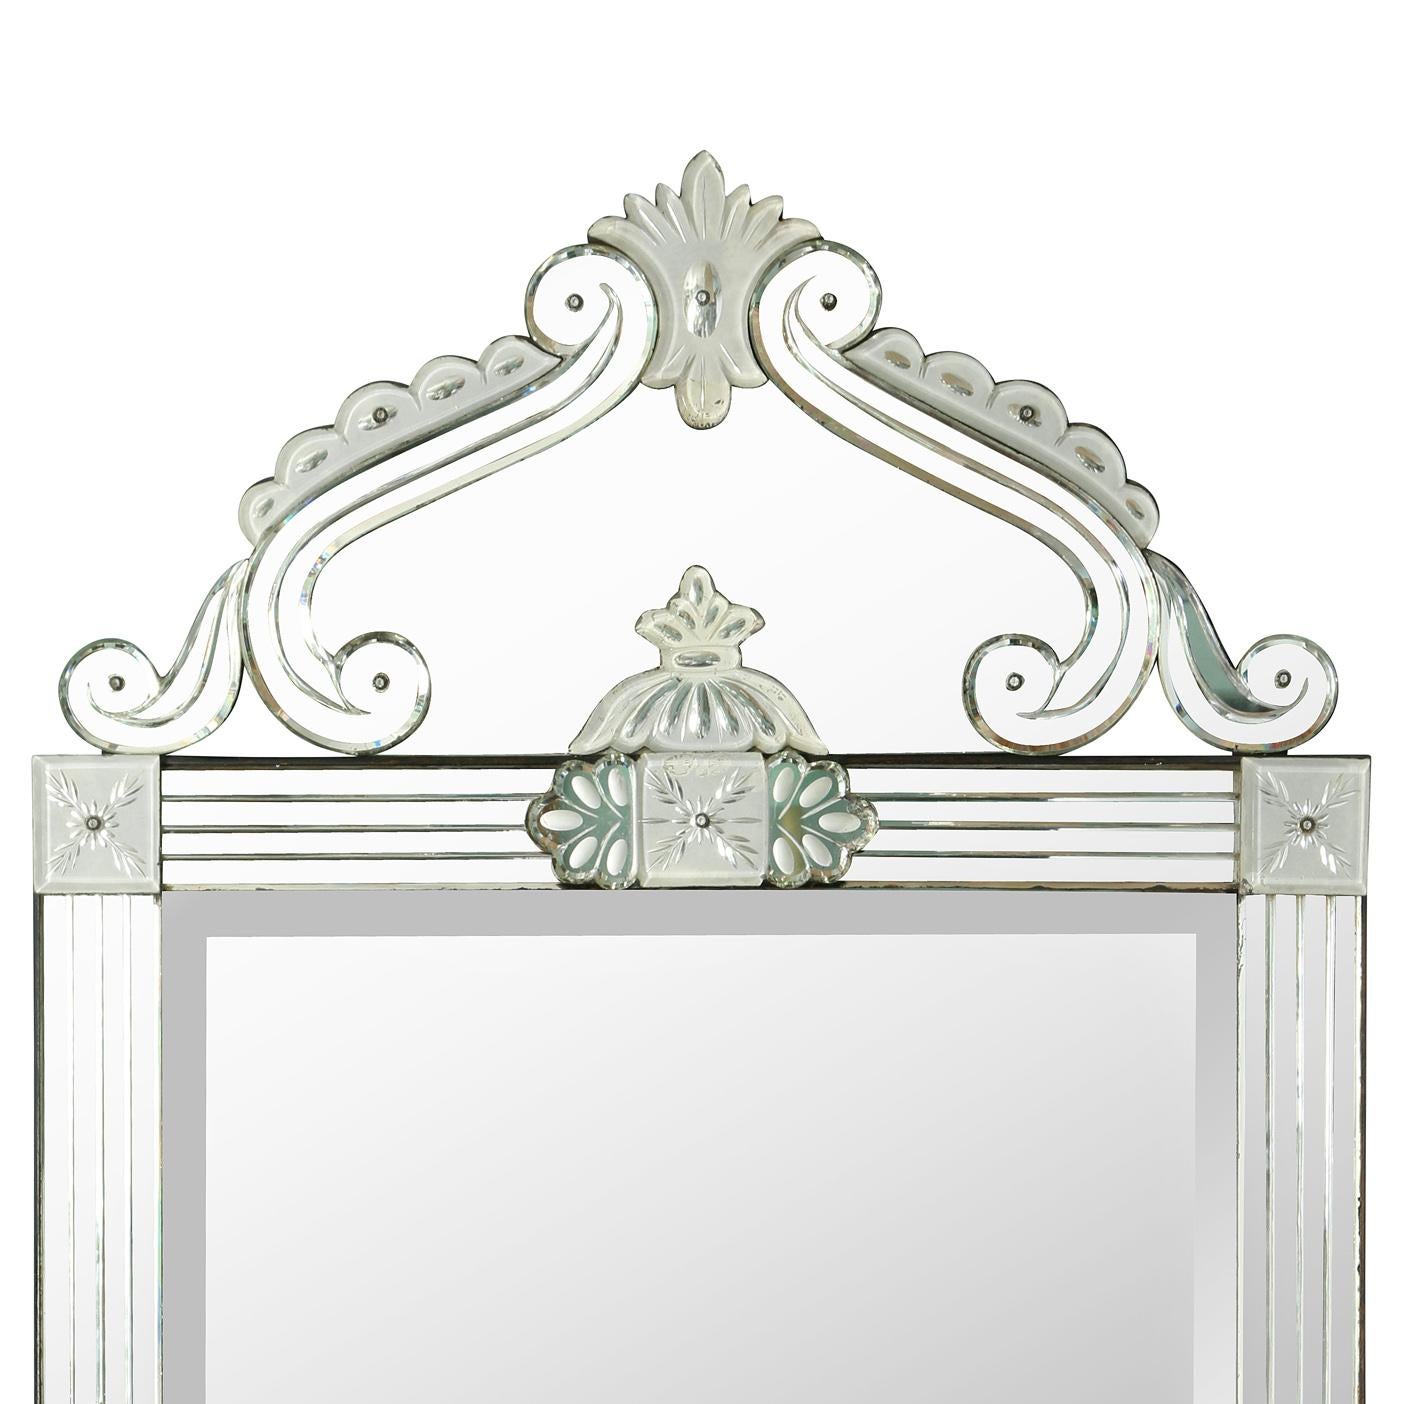 A rectangular Venetian style beveled mirror with foliate details and a mirrored swirled crest at top.  The mirror frame features a  ribbed design with a foliate motif at each corner and the center of each of the four sides.  The Mid Century mirror 